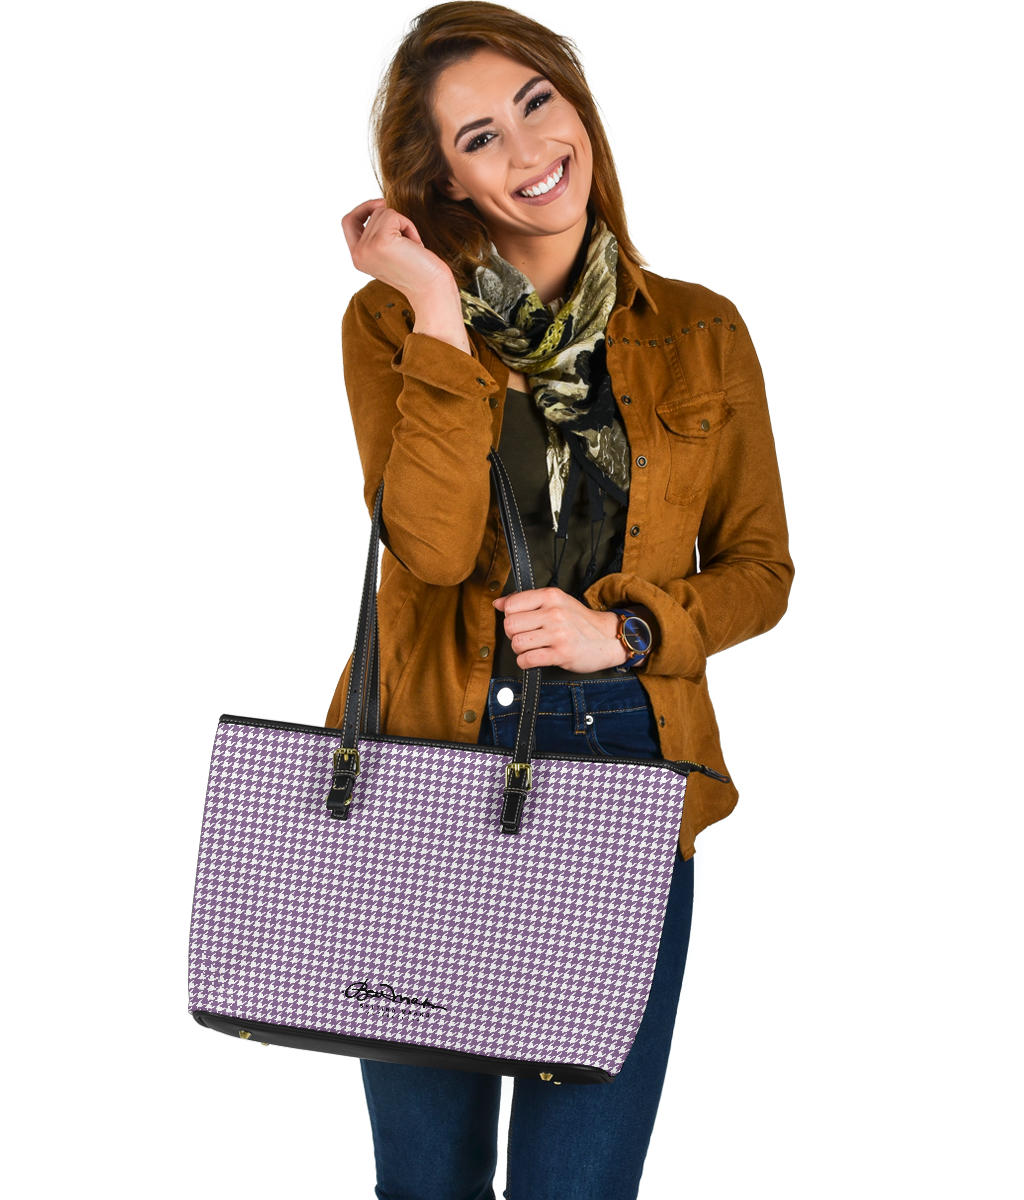 Lilac Houndstooth Large Tote Bag